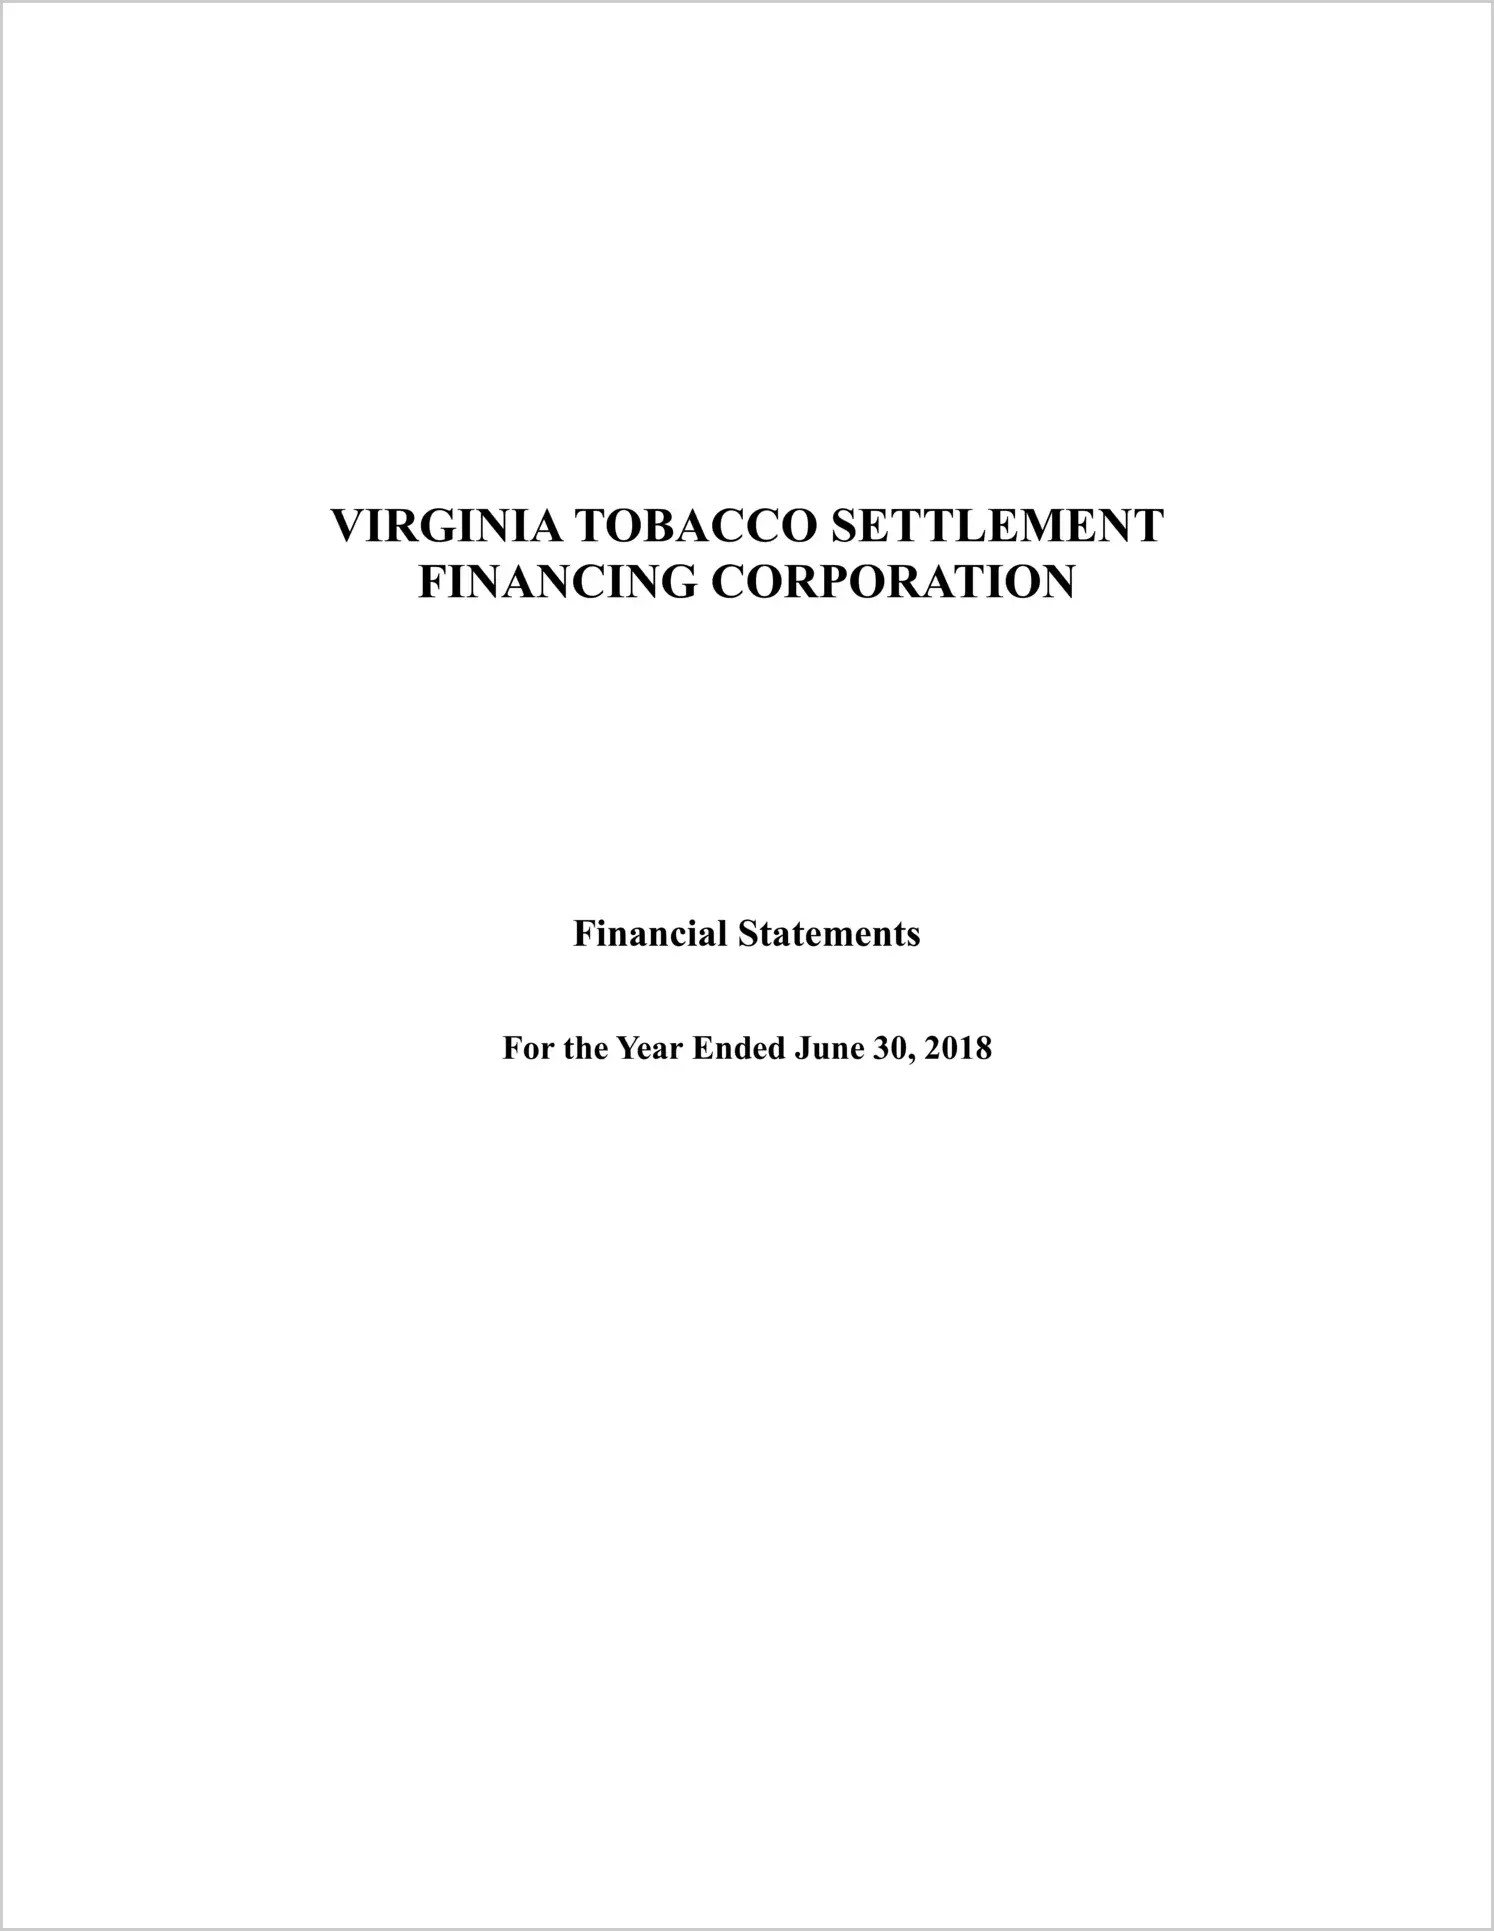 Virginia Tobacco Settlement Financing Corporation for the year ended June 30, 2018